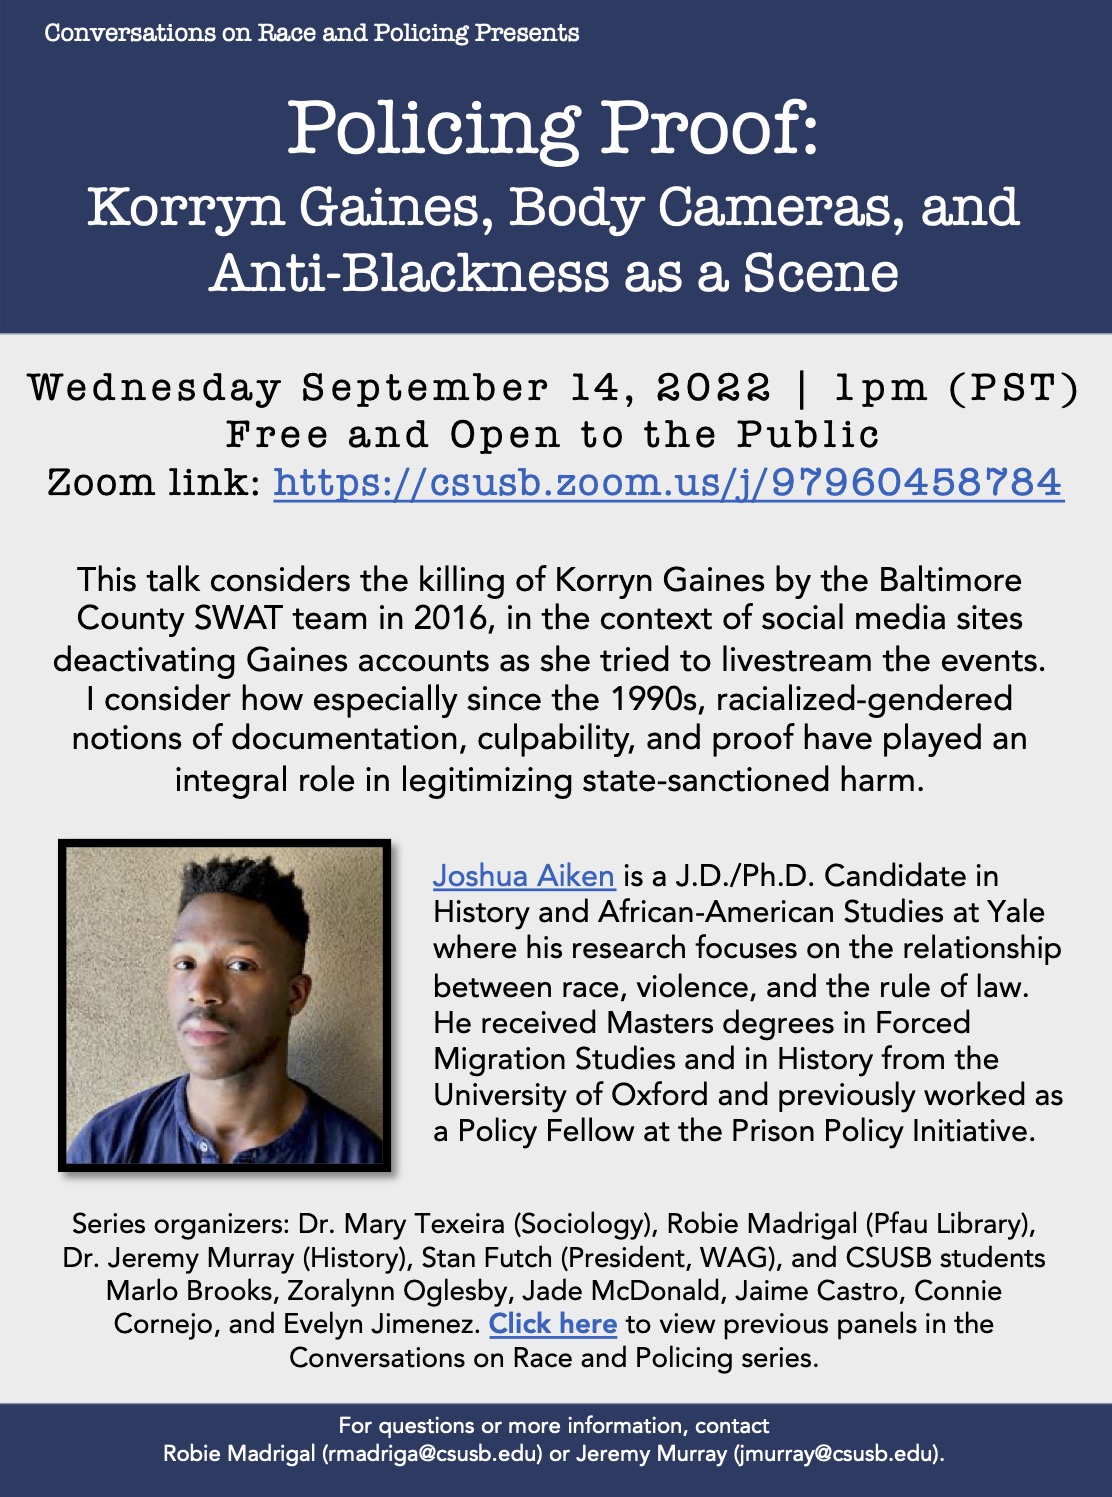 Conversations on Race and Policing Sept 14 event flier